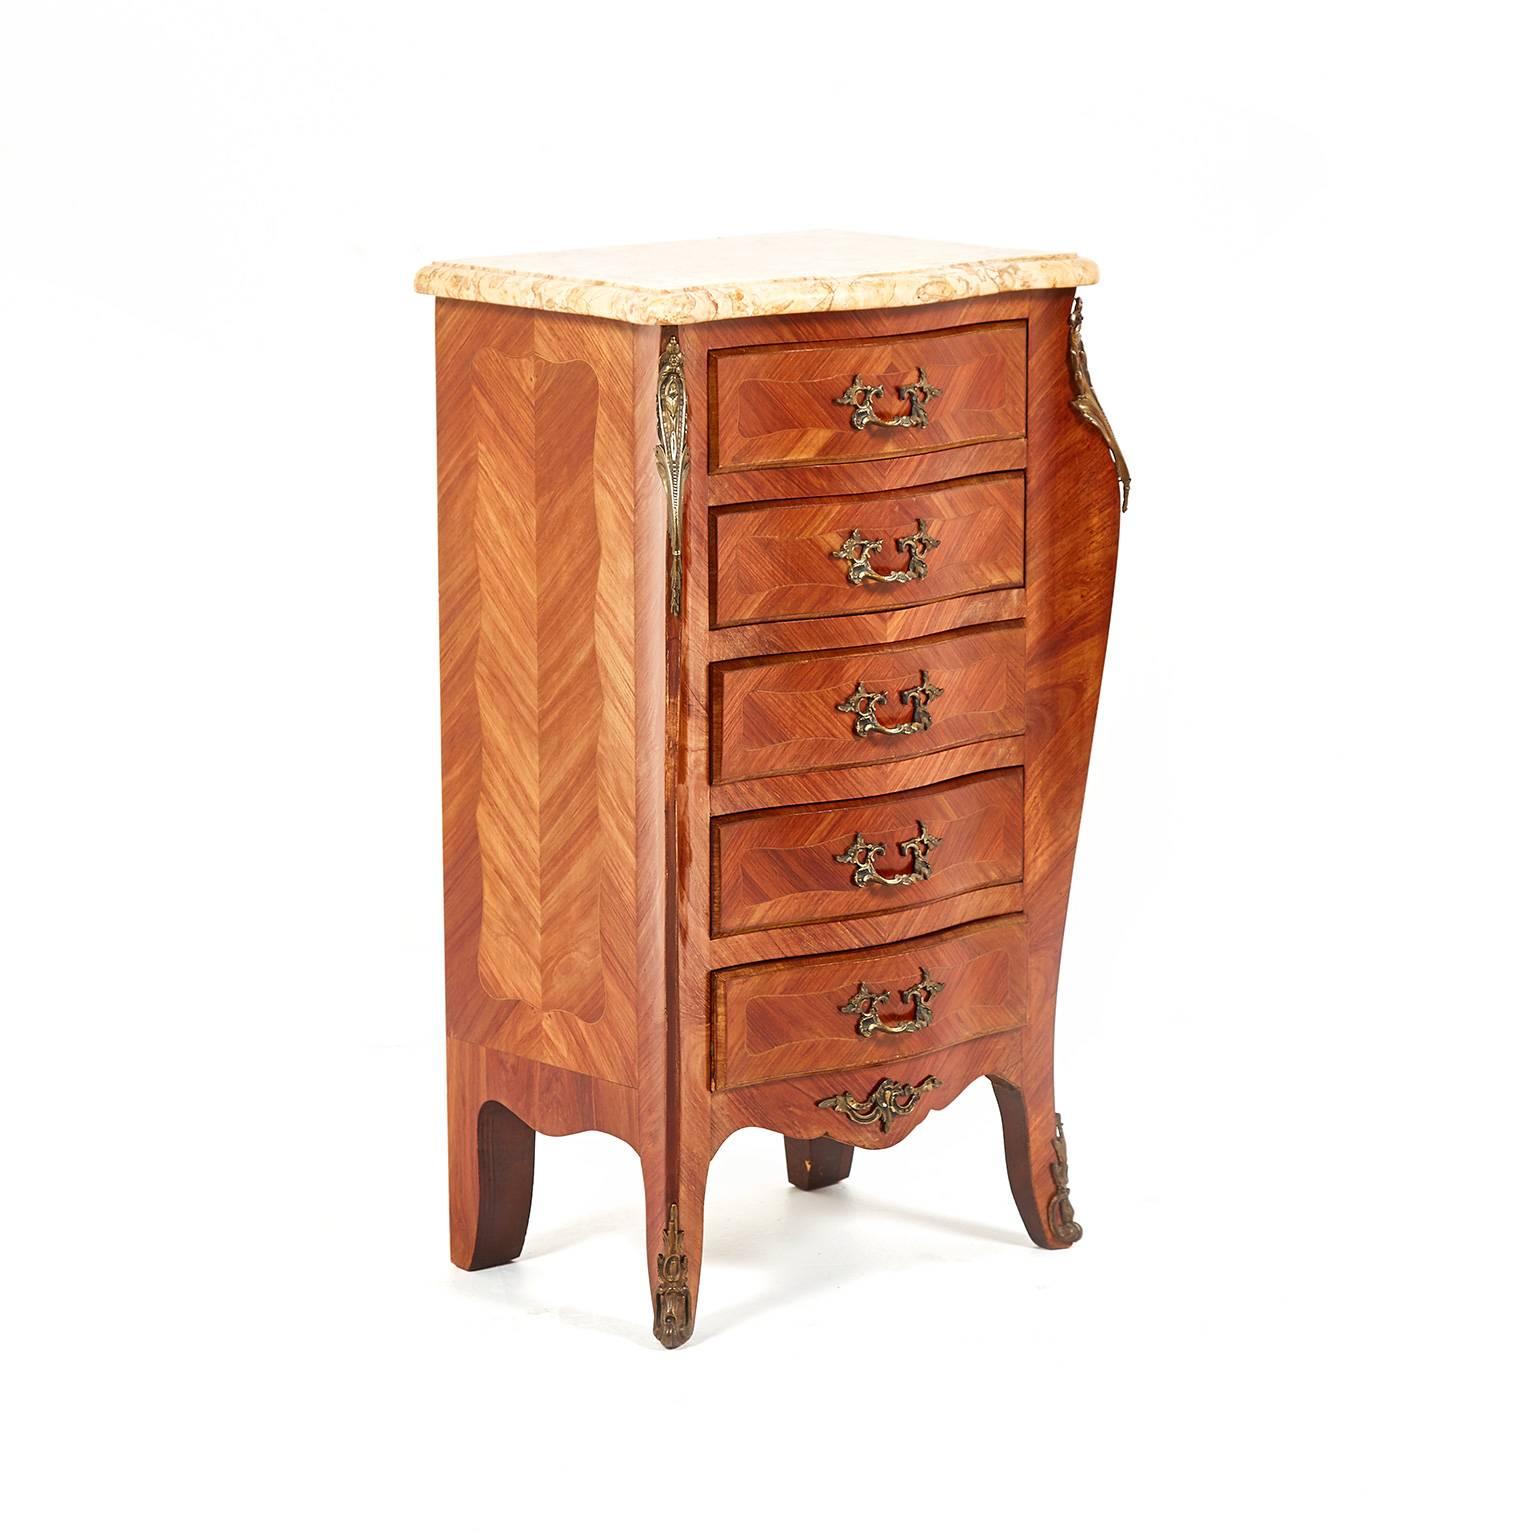 Inlay Inlaid Kingwood Marble-Top ‘Bombe’ Chest, circa 1930